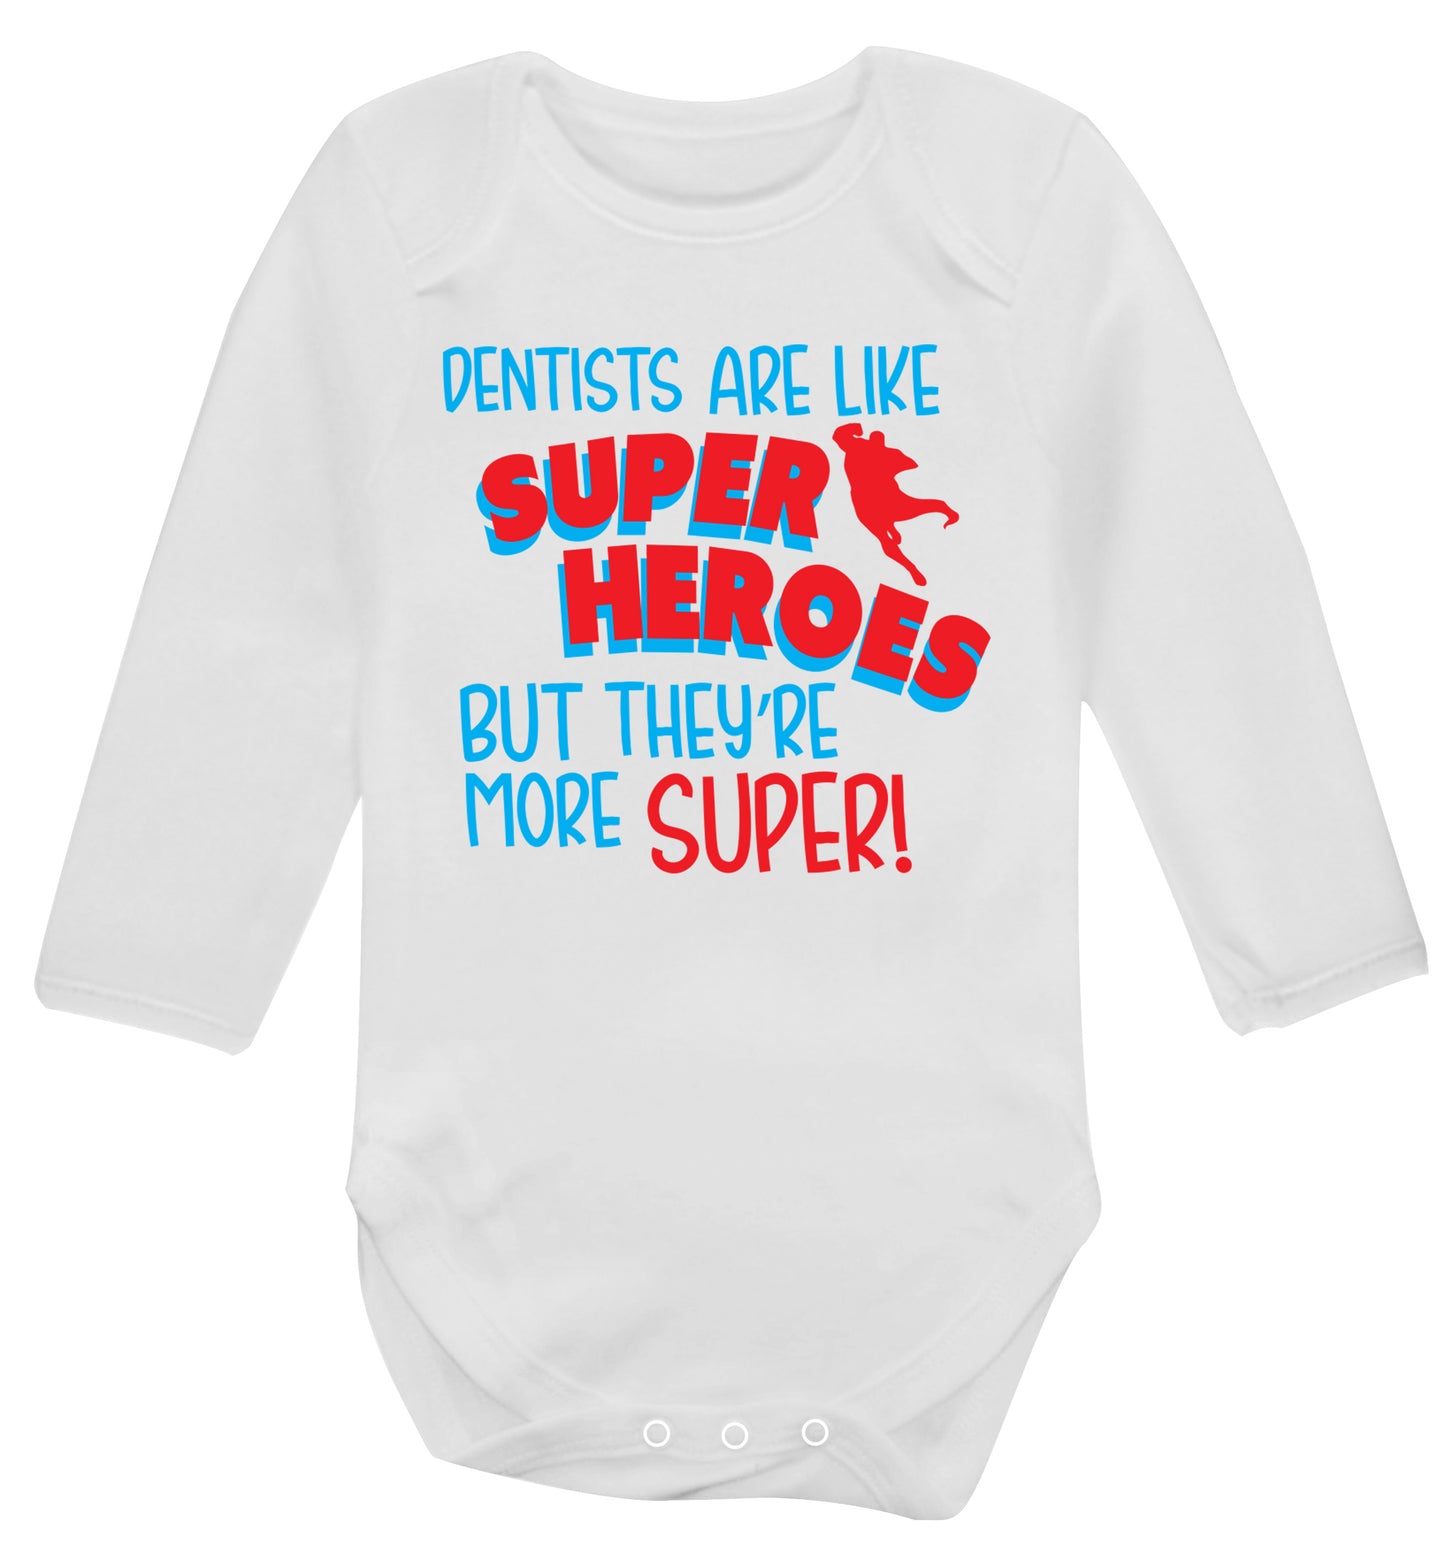 Dentists are like superheros but they're more super Baby Vest long sleeved white 6-12 months